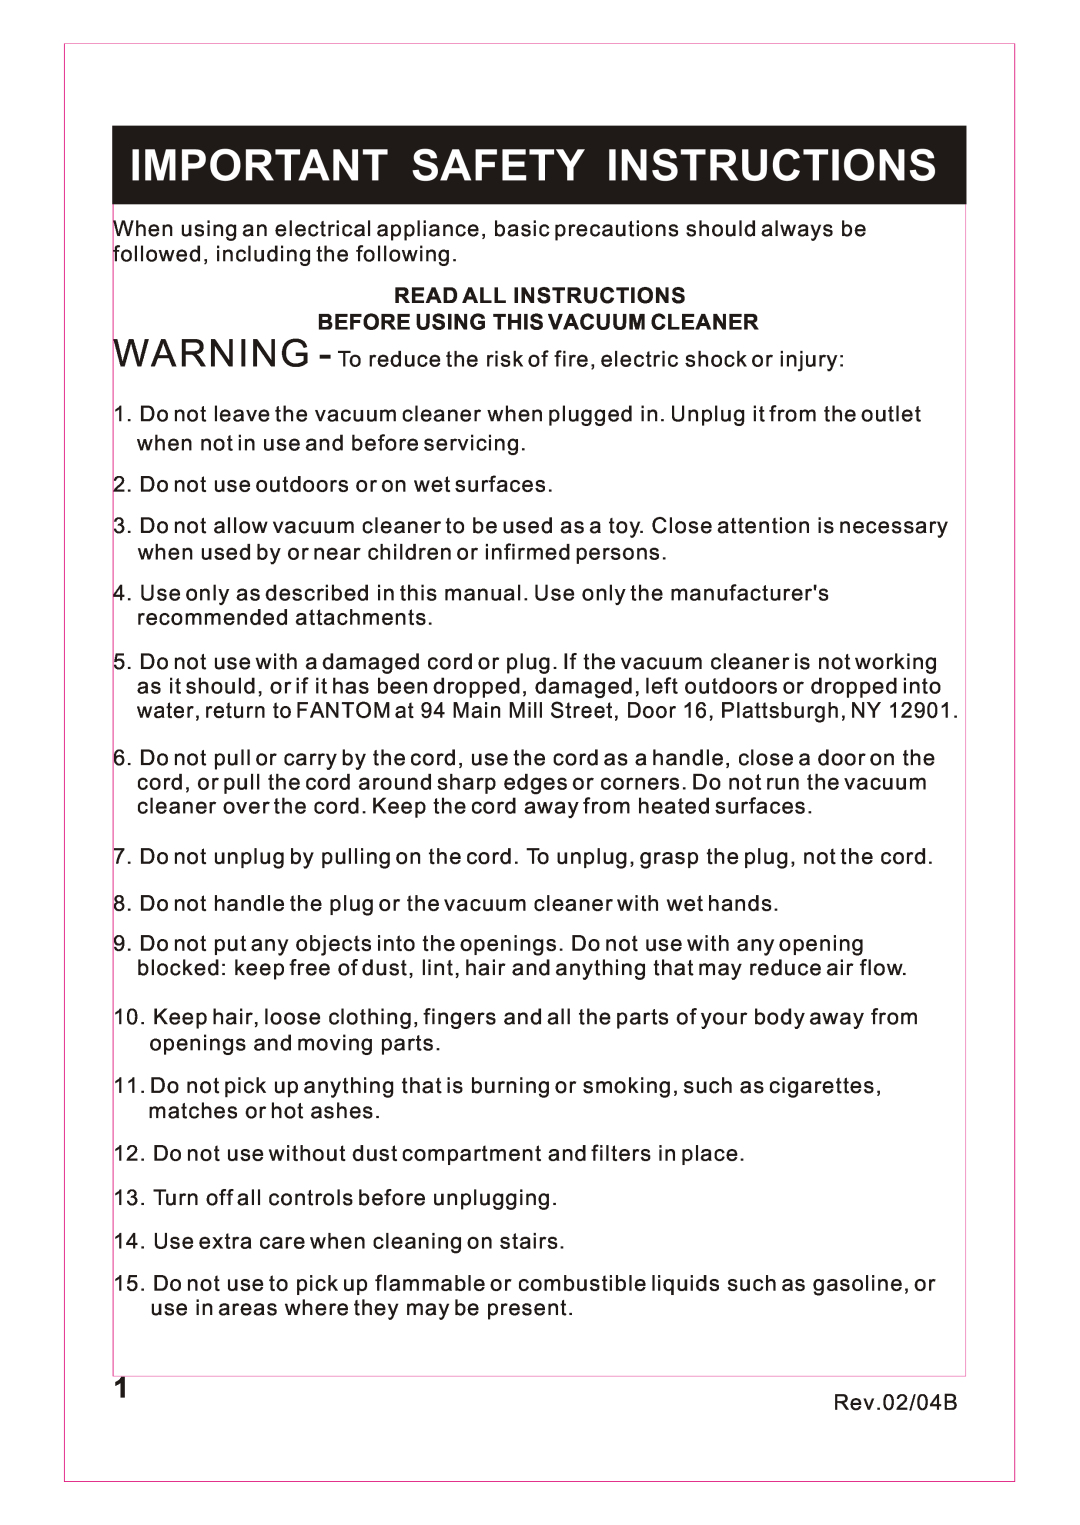 Fantom Vacuum FM743H Important Safety Instructions, Read All Instructions, Before Using This Vacuum Cleaner, 1Rev.02/04B 